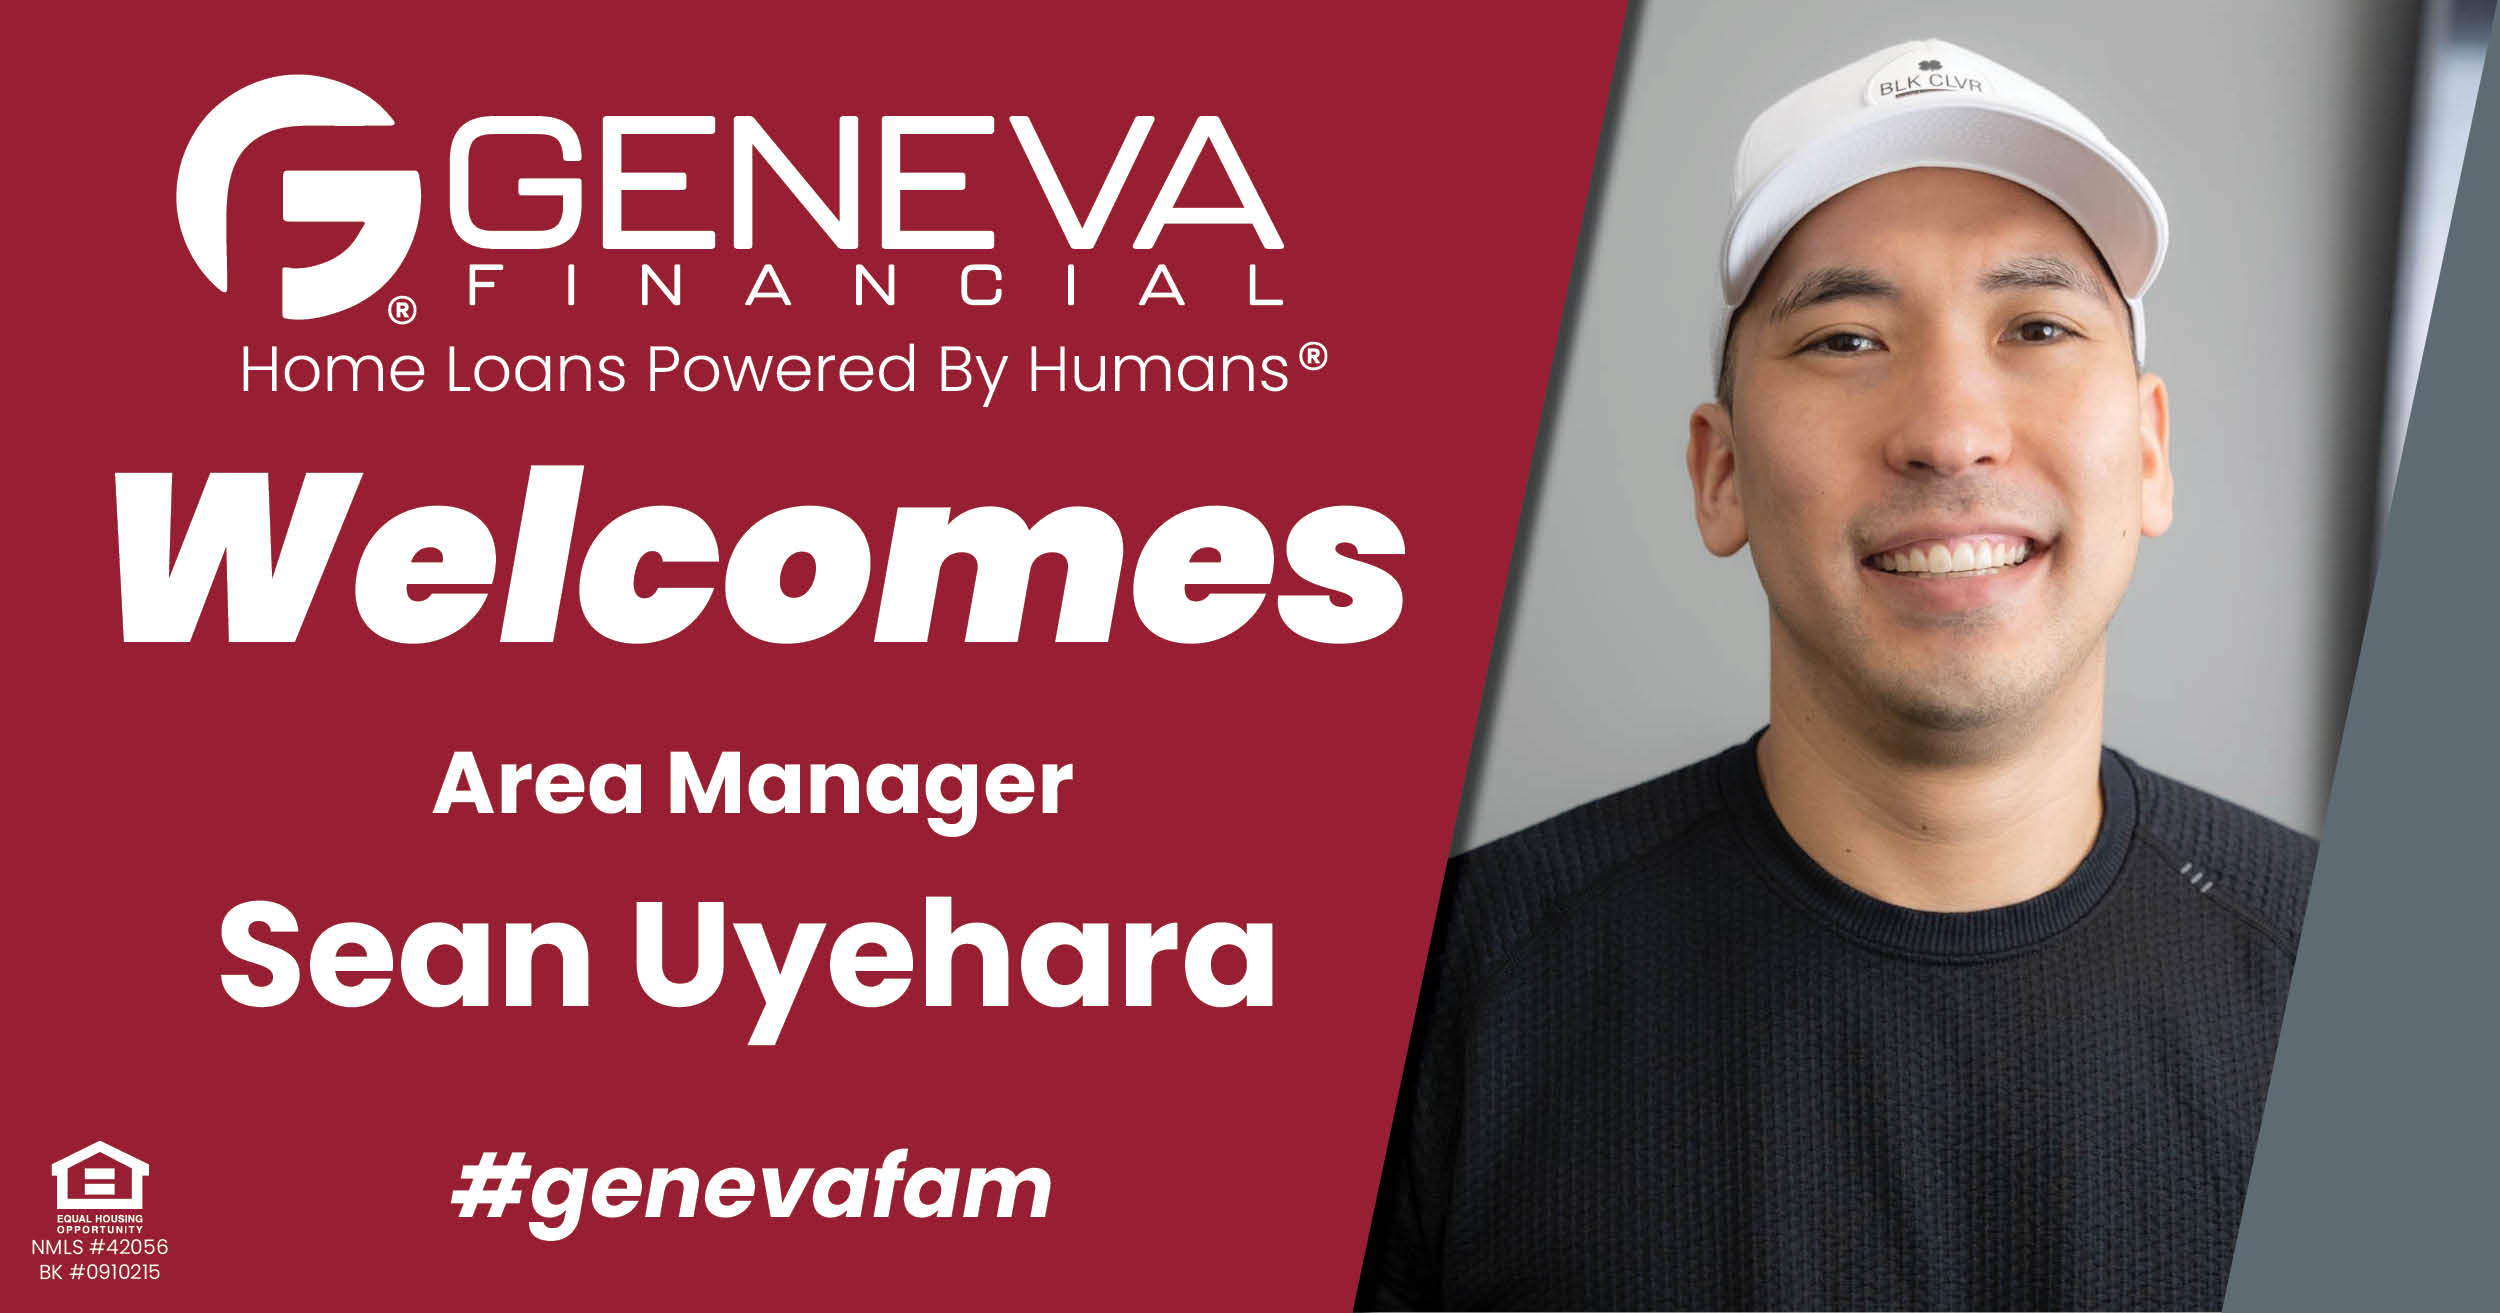 Geneva Financial Welcomes New Area Manager Sean Uyehara to Las Vegas, Nevada – Home Loans Powered by Humans®.